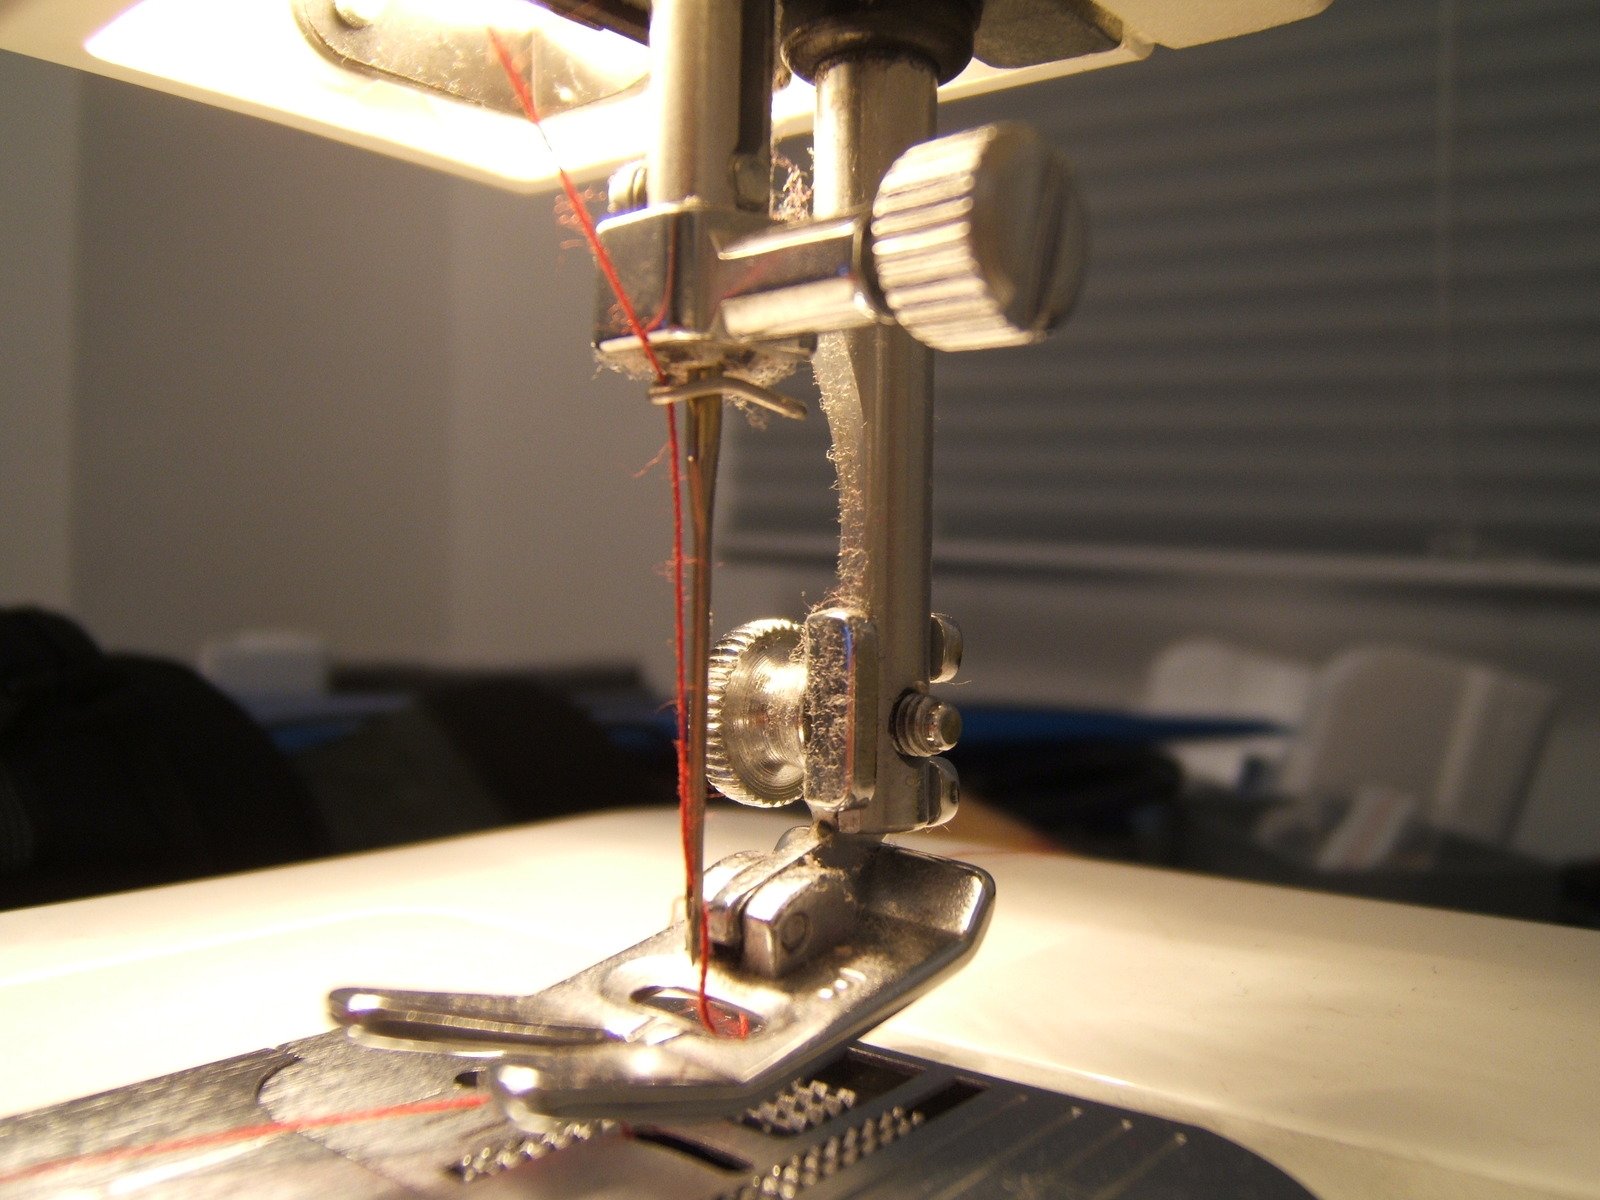 the sewing machine is very close to the white surface